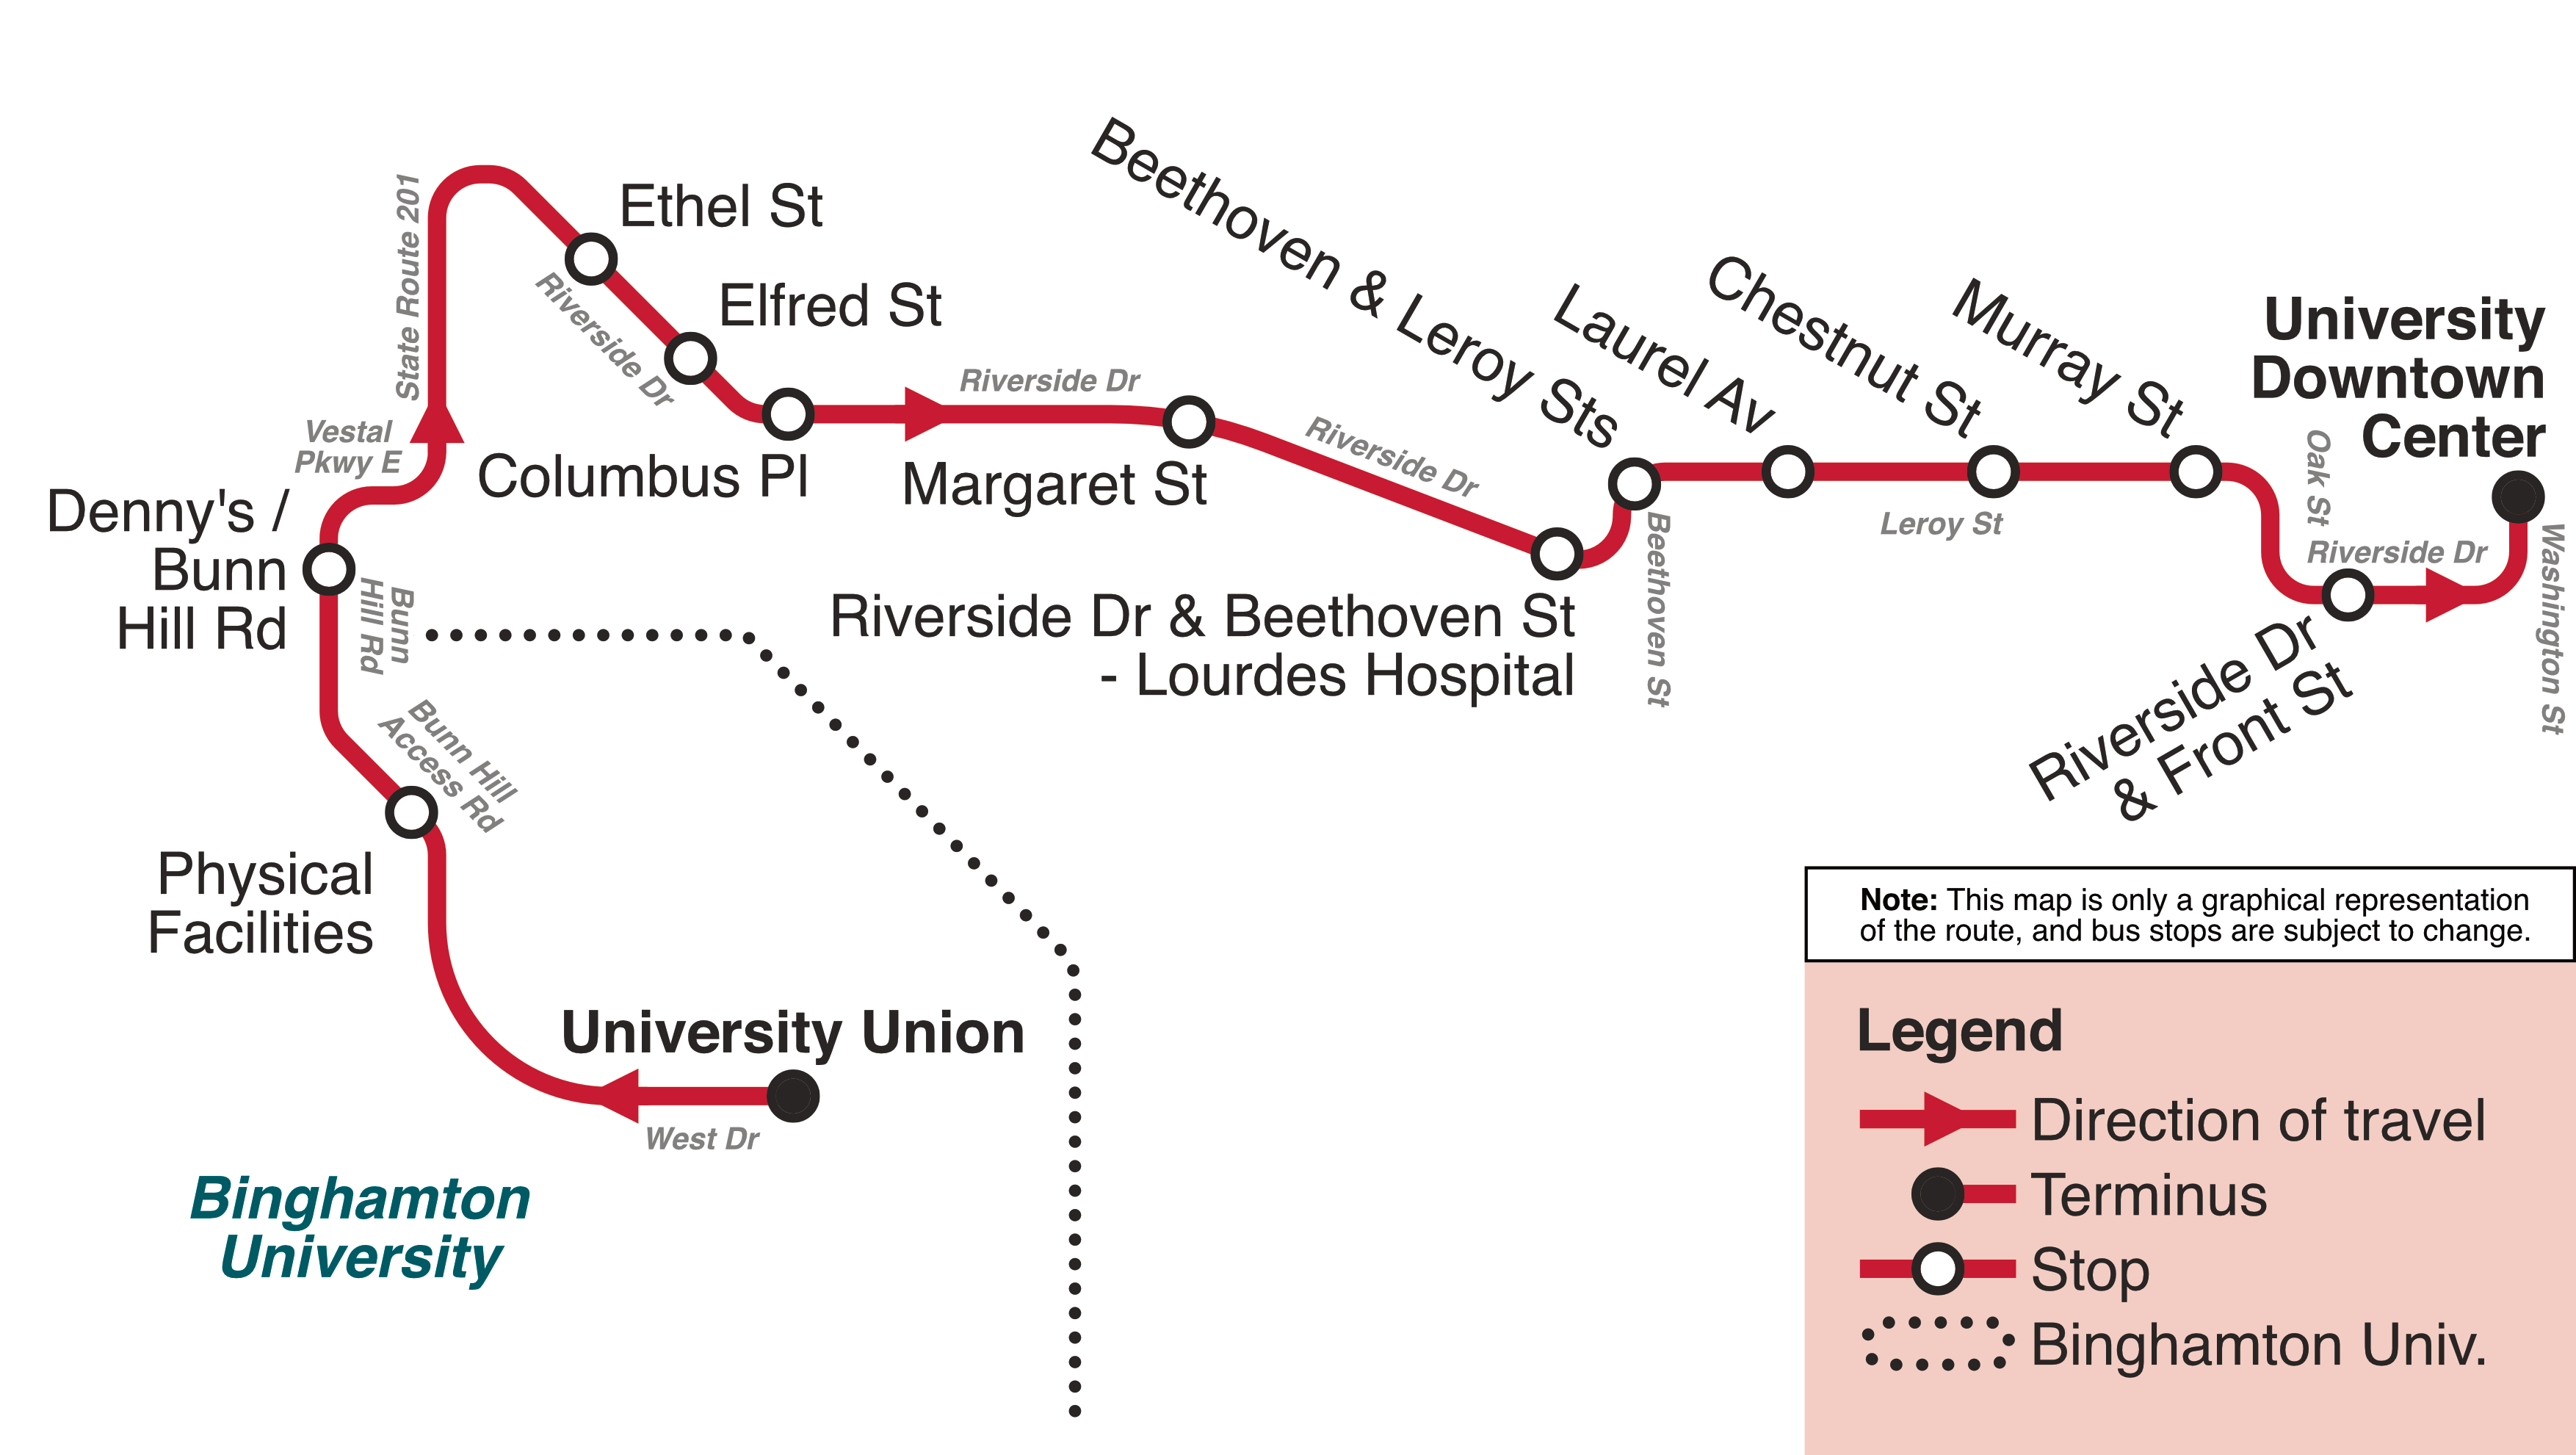 Downtown Center-Leroy St Outbound Route Map